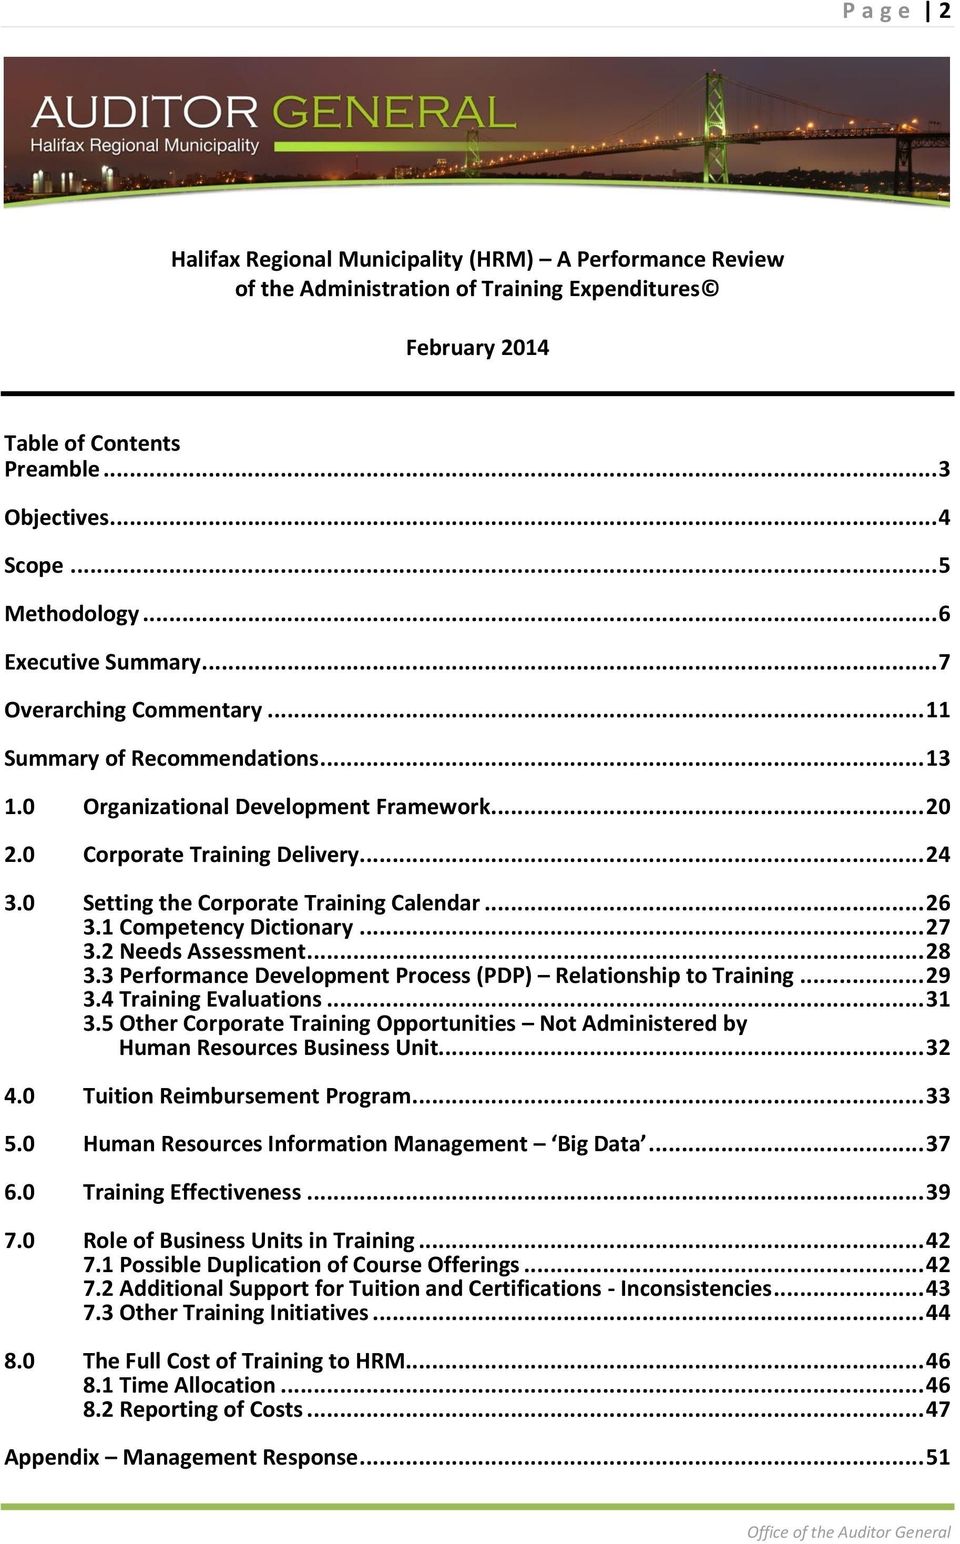 0 Setting the Corporate Training Calendar... 26 3.1 Competency Dictionary... 27 3.2 Needs Assessment... 28 3.3 Performance Development Process (PDP) Relationship to Training... 29 3.